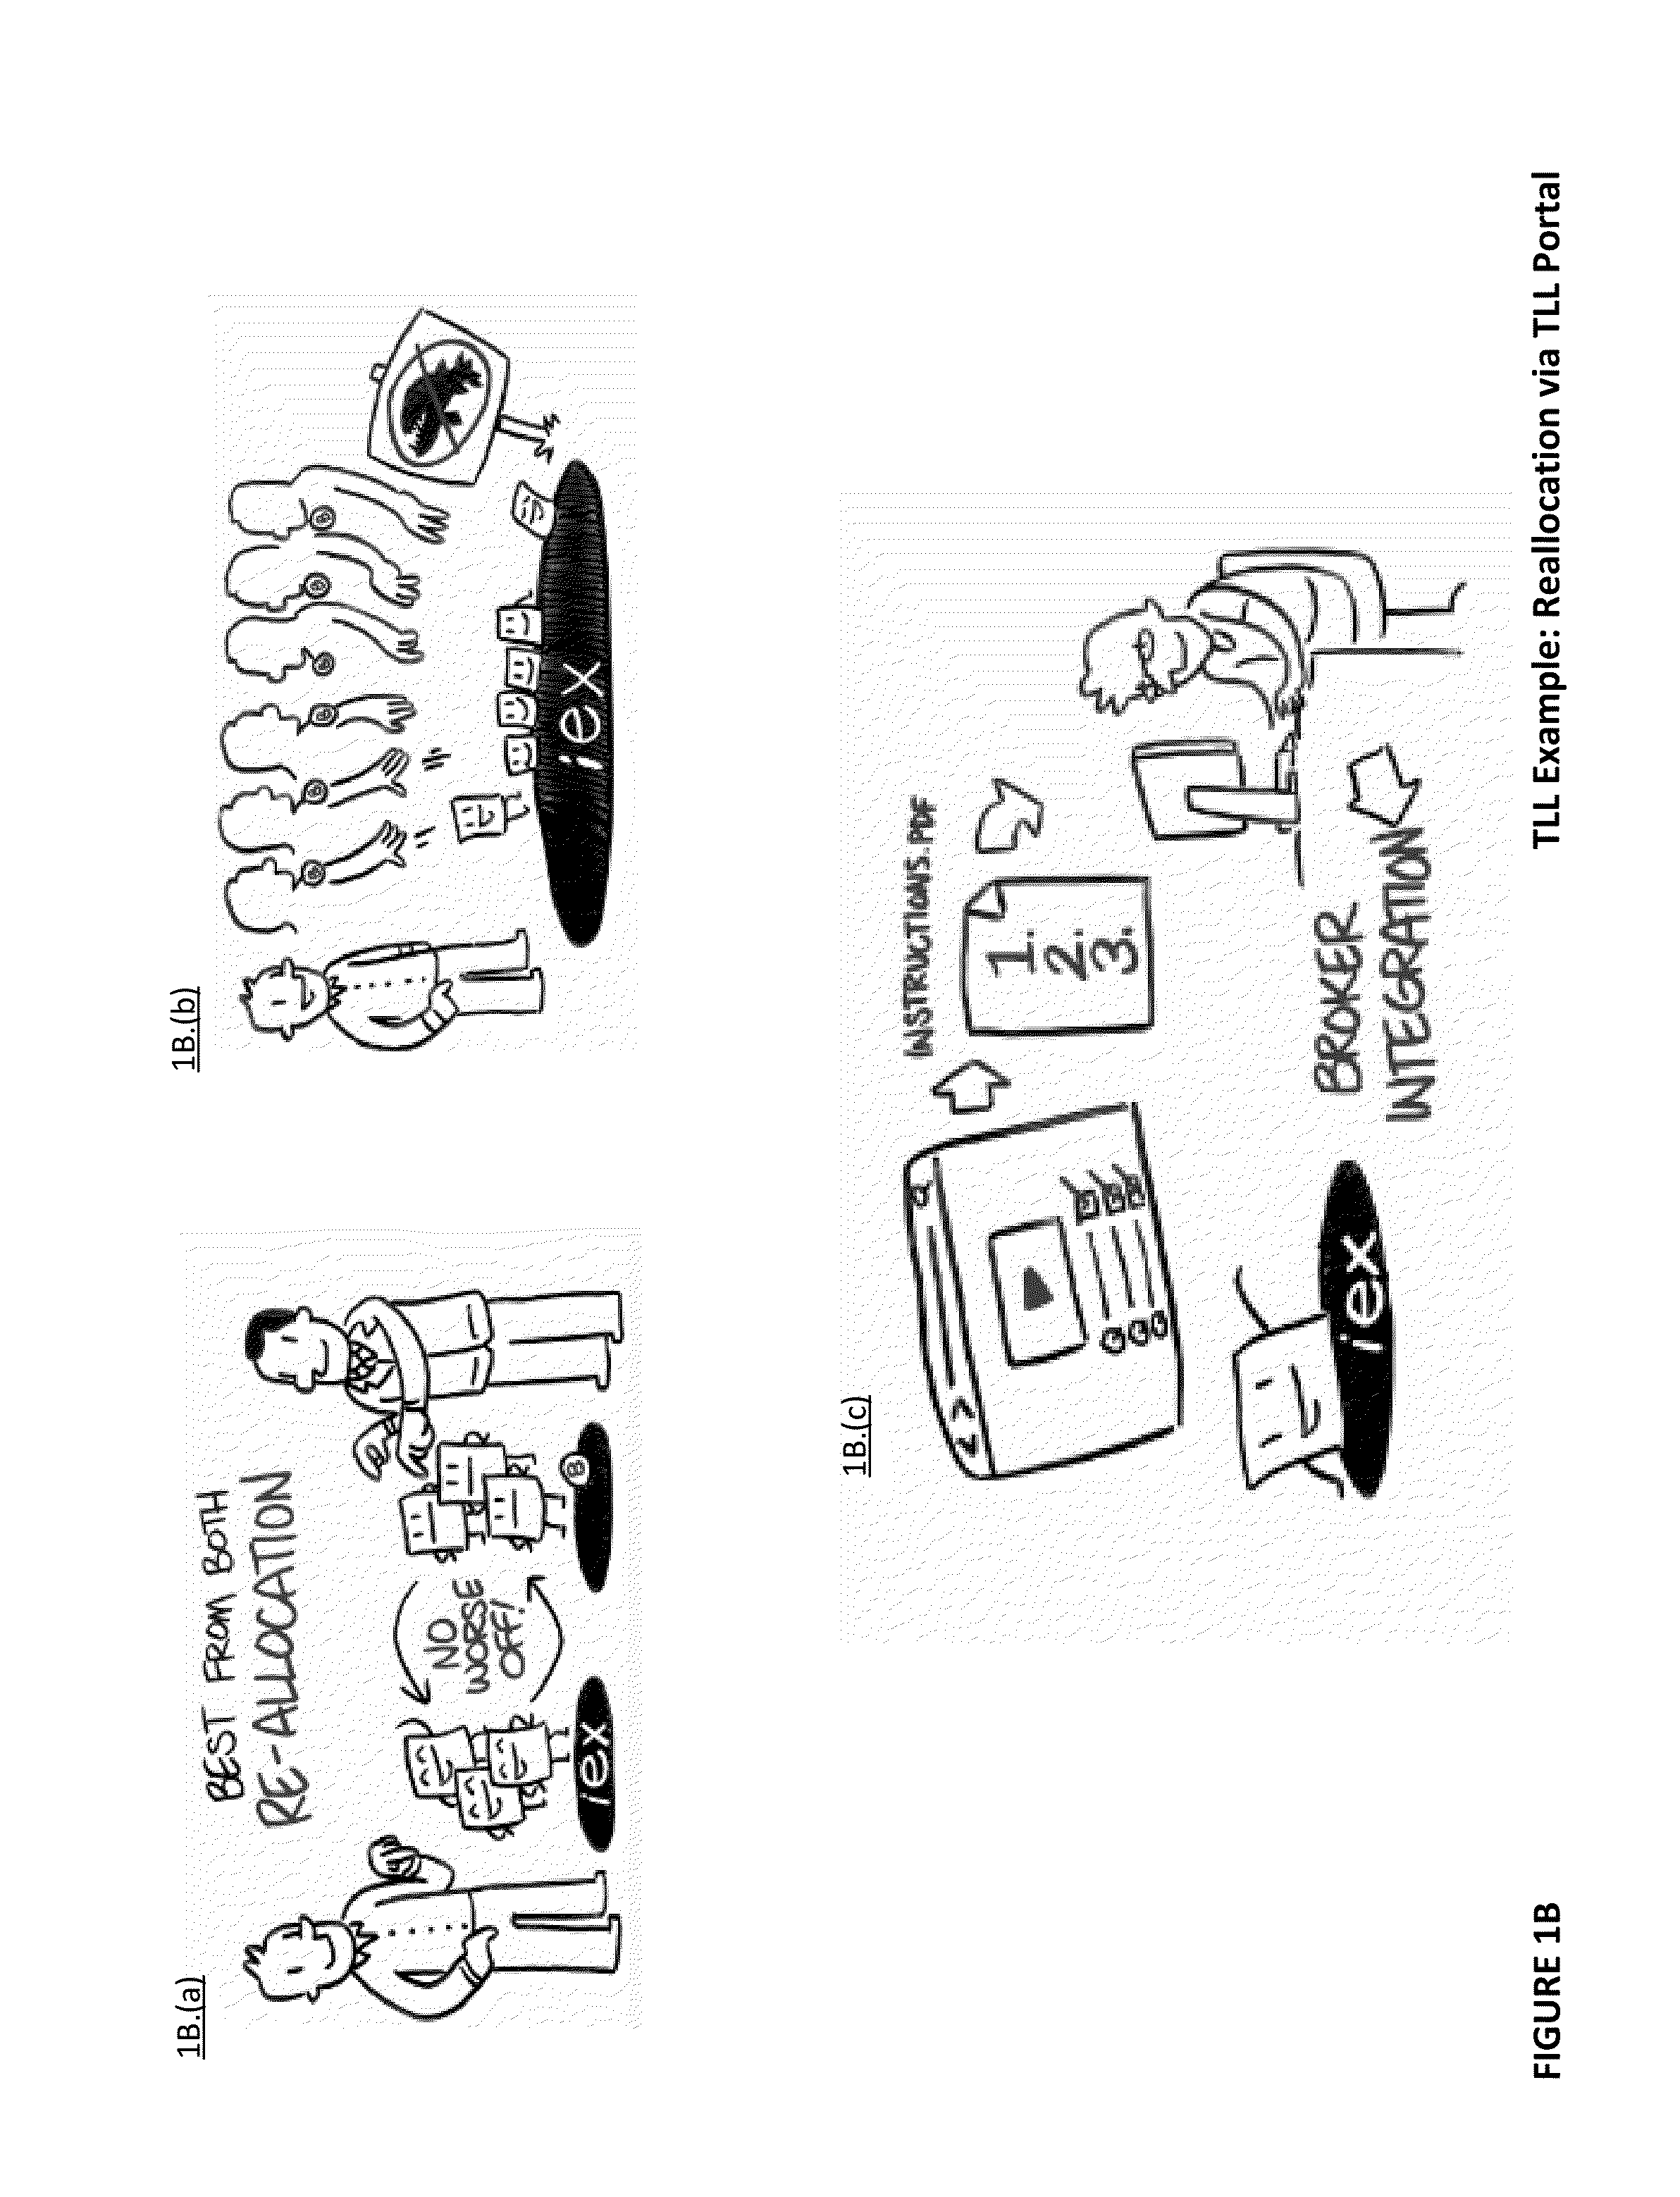 System and method for facilitation cross orders